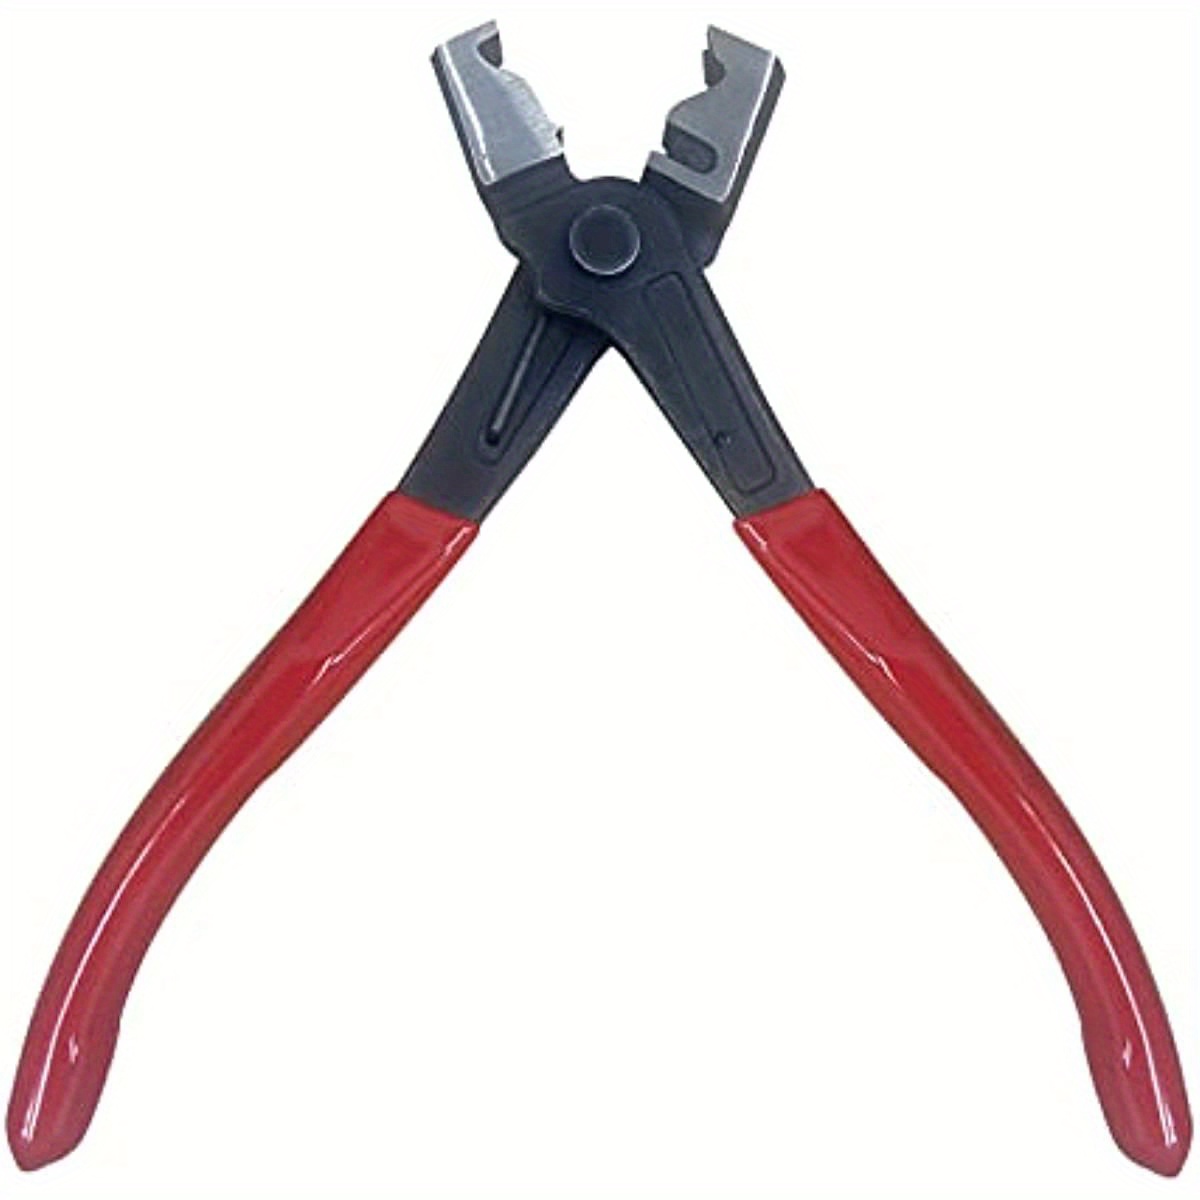 

Hose Clamp Pliers, Car Hose Clamp Clic-r Type Collar Pliers Cv Boot Clamp Repair Tools For Cars